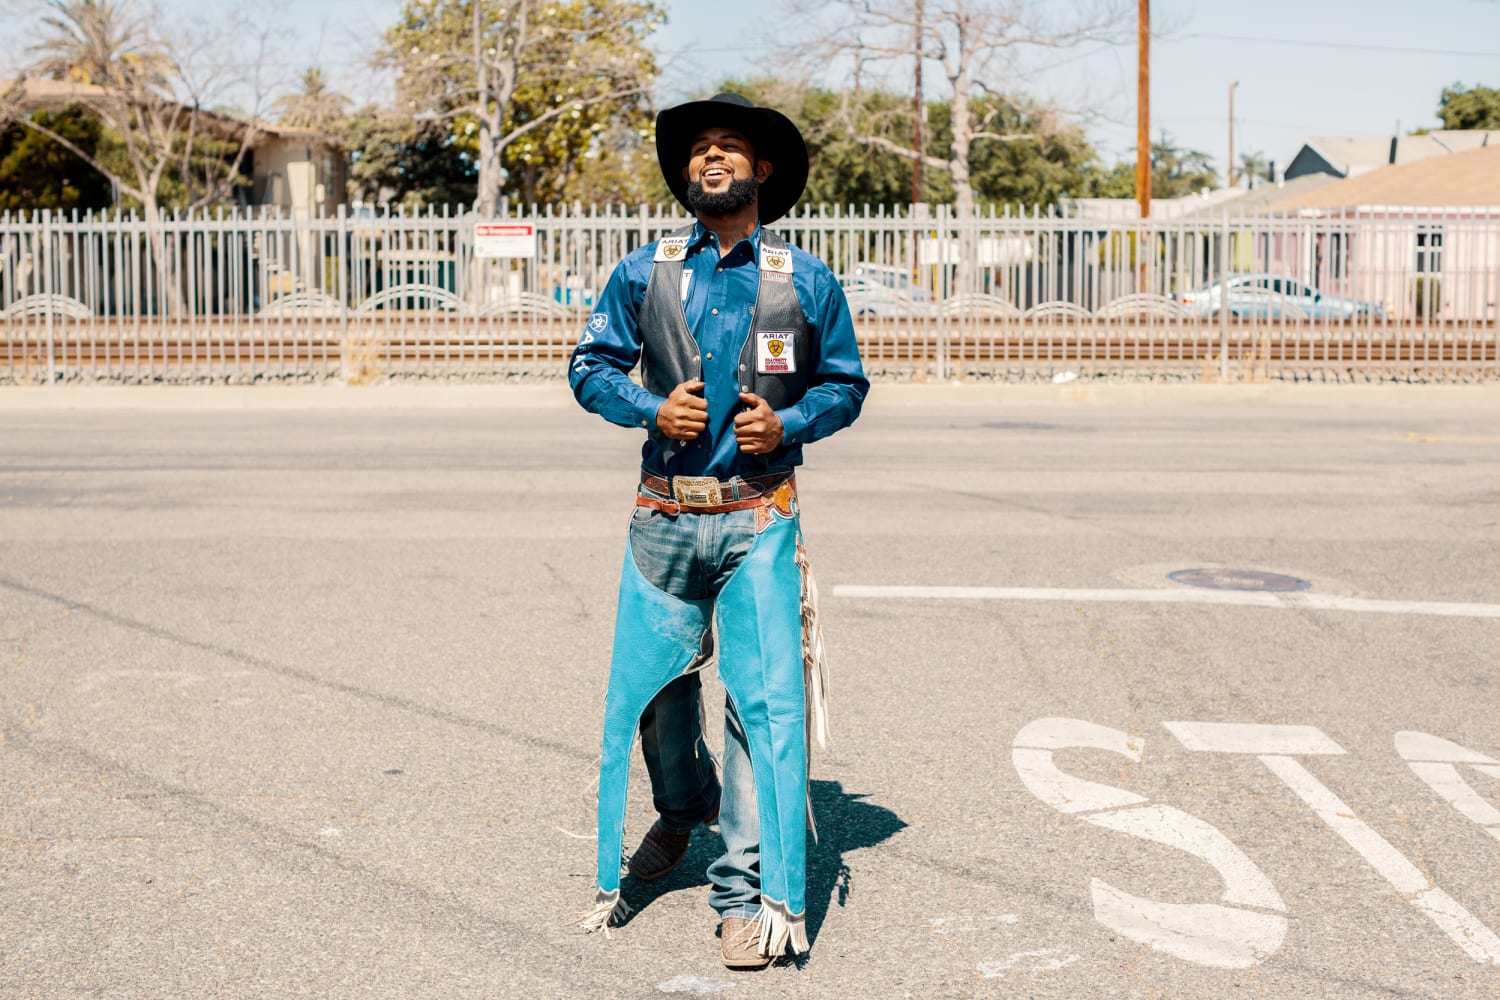 Meet the Compton Cowboy riding to honor Black cowboys and Juneteenth